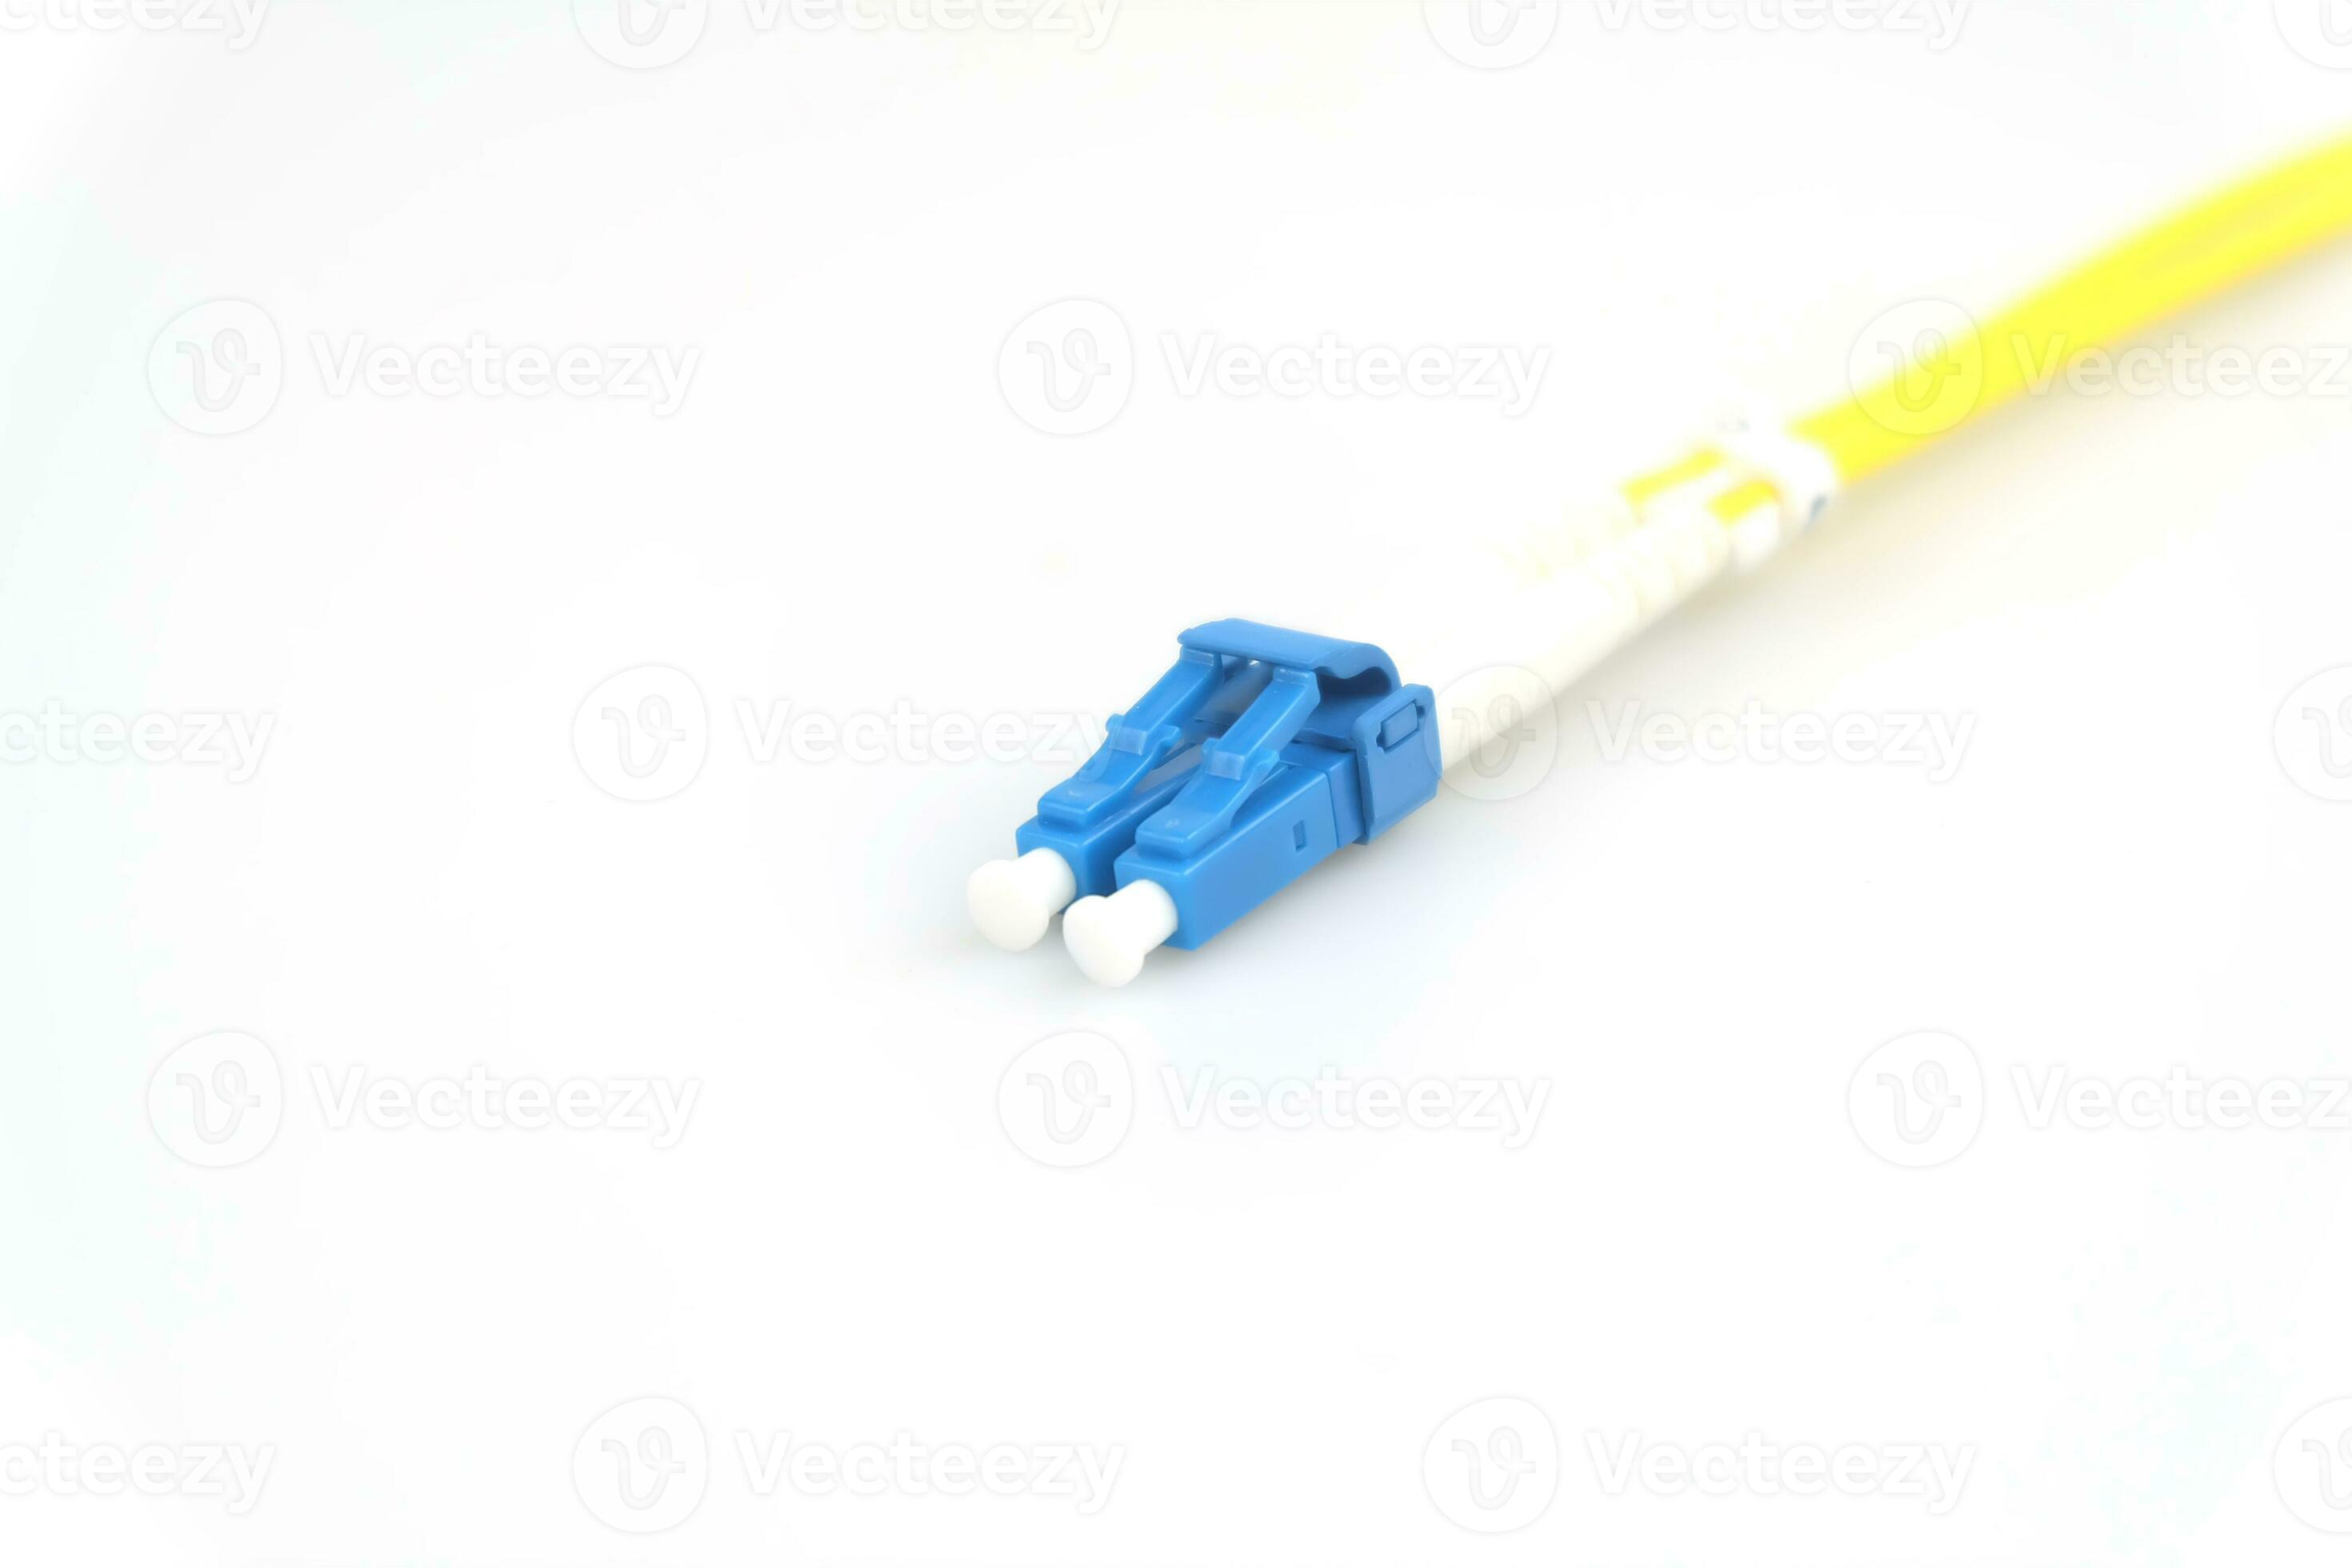 https://static.vecteezy.com/system/resources/previews/027/840/453/large_2x/fiber-optic-cable-connector-type-lc-isolated-on-white-background-photo.jpg